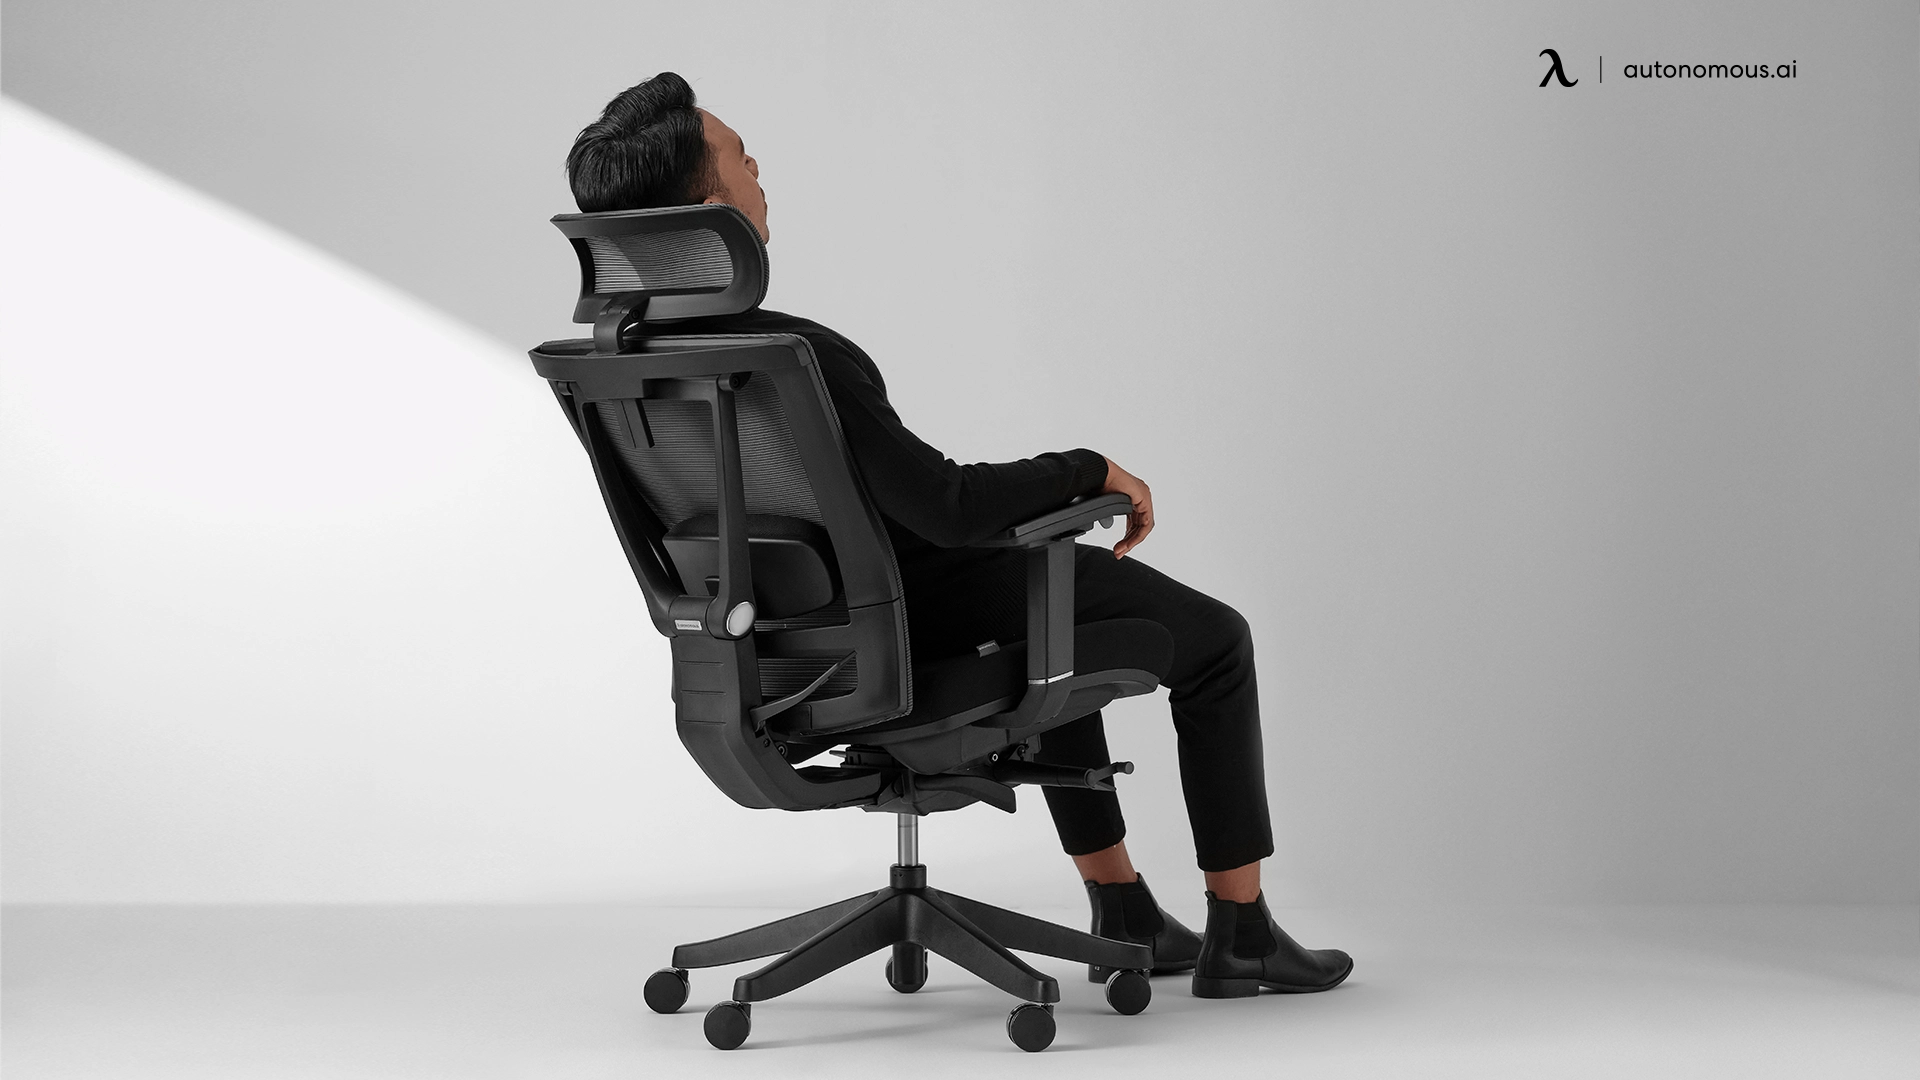 Low, Mid or High-Back: Which Office Chair is Best for You? - K-Mark